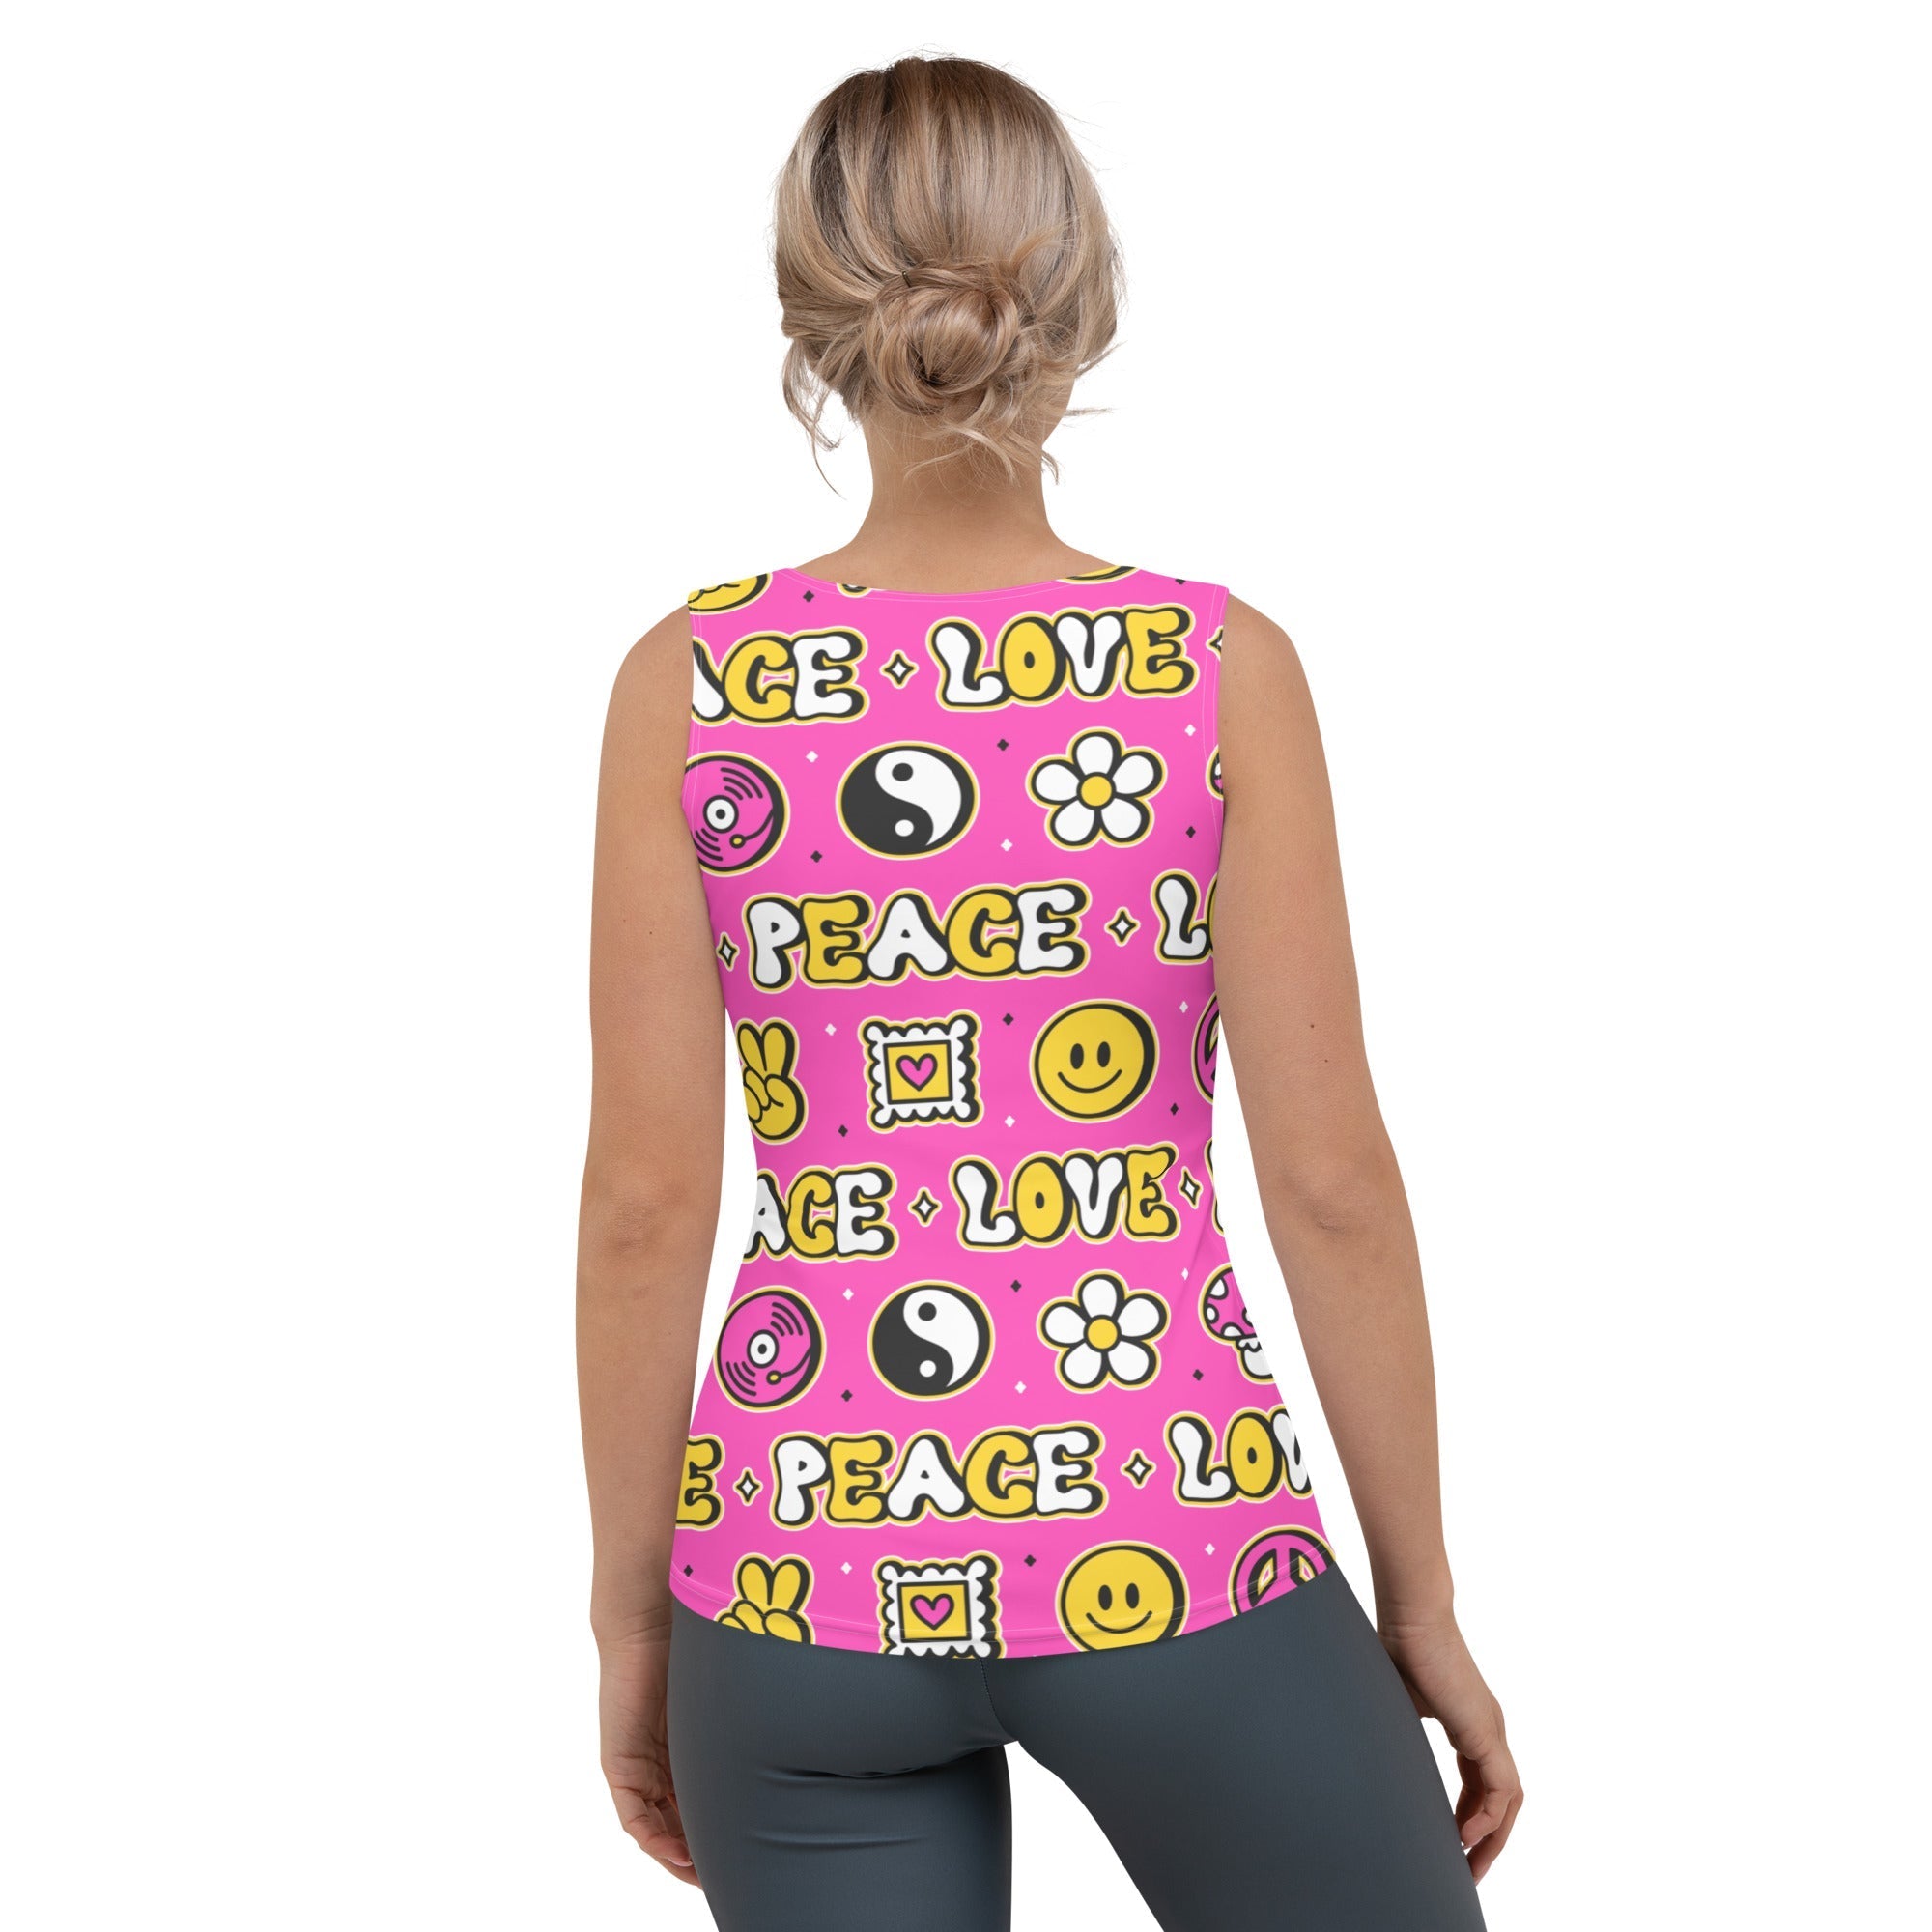 Peace and Love Tank Top